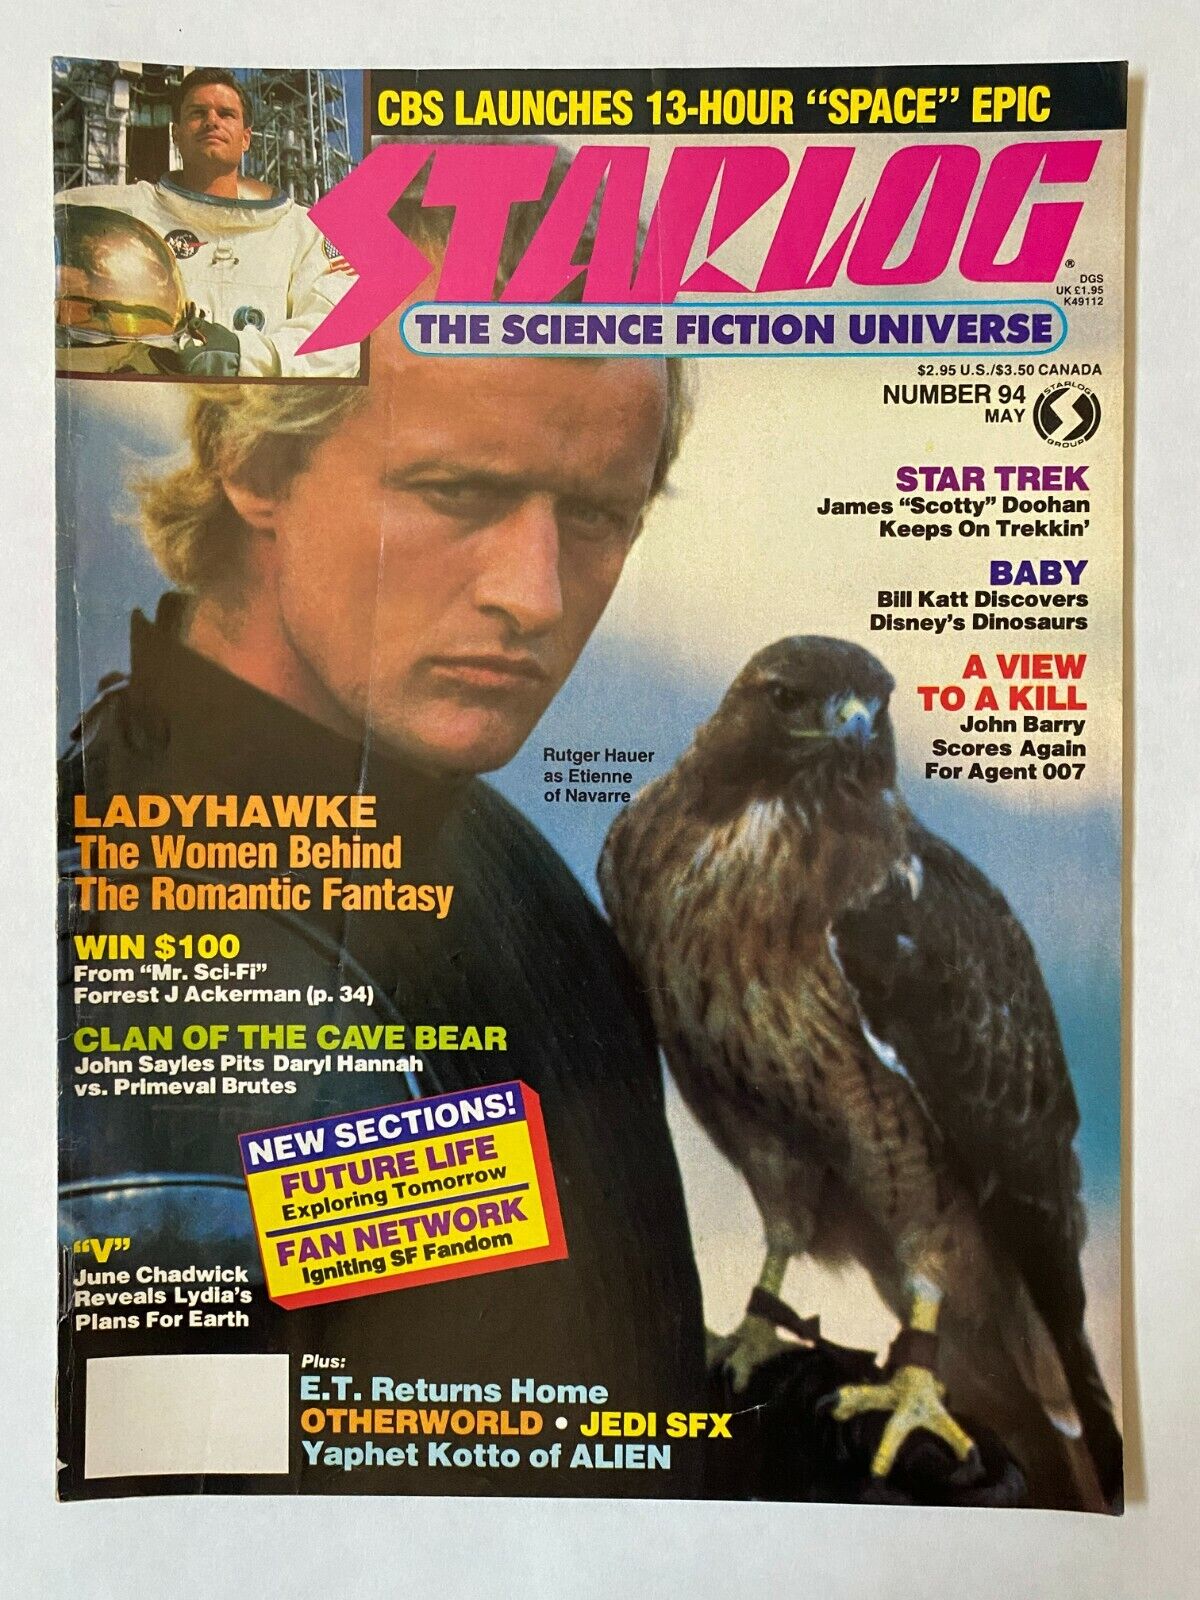 STARLOG #94 - 1985 May Featuring Ladyhawke On Cover VINTAGE